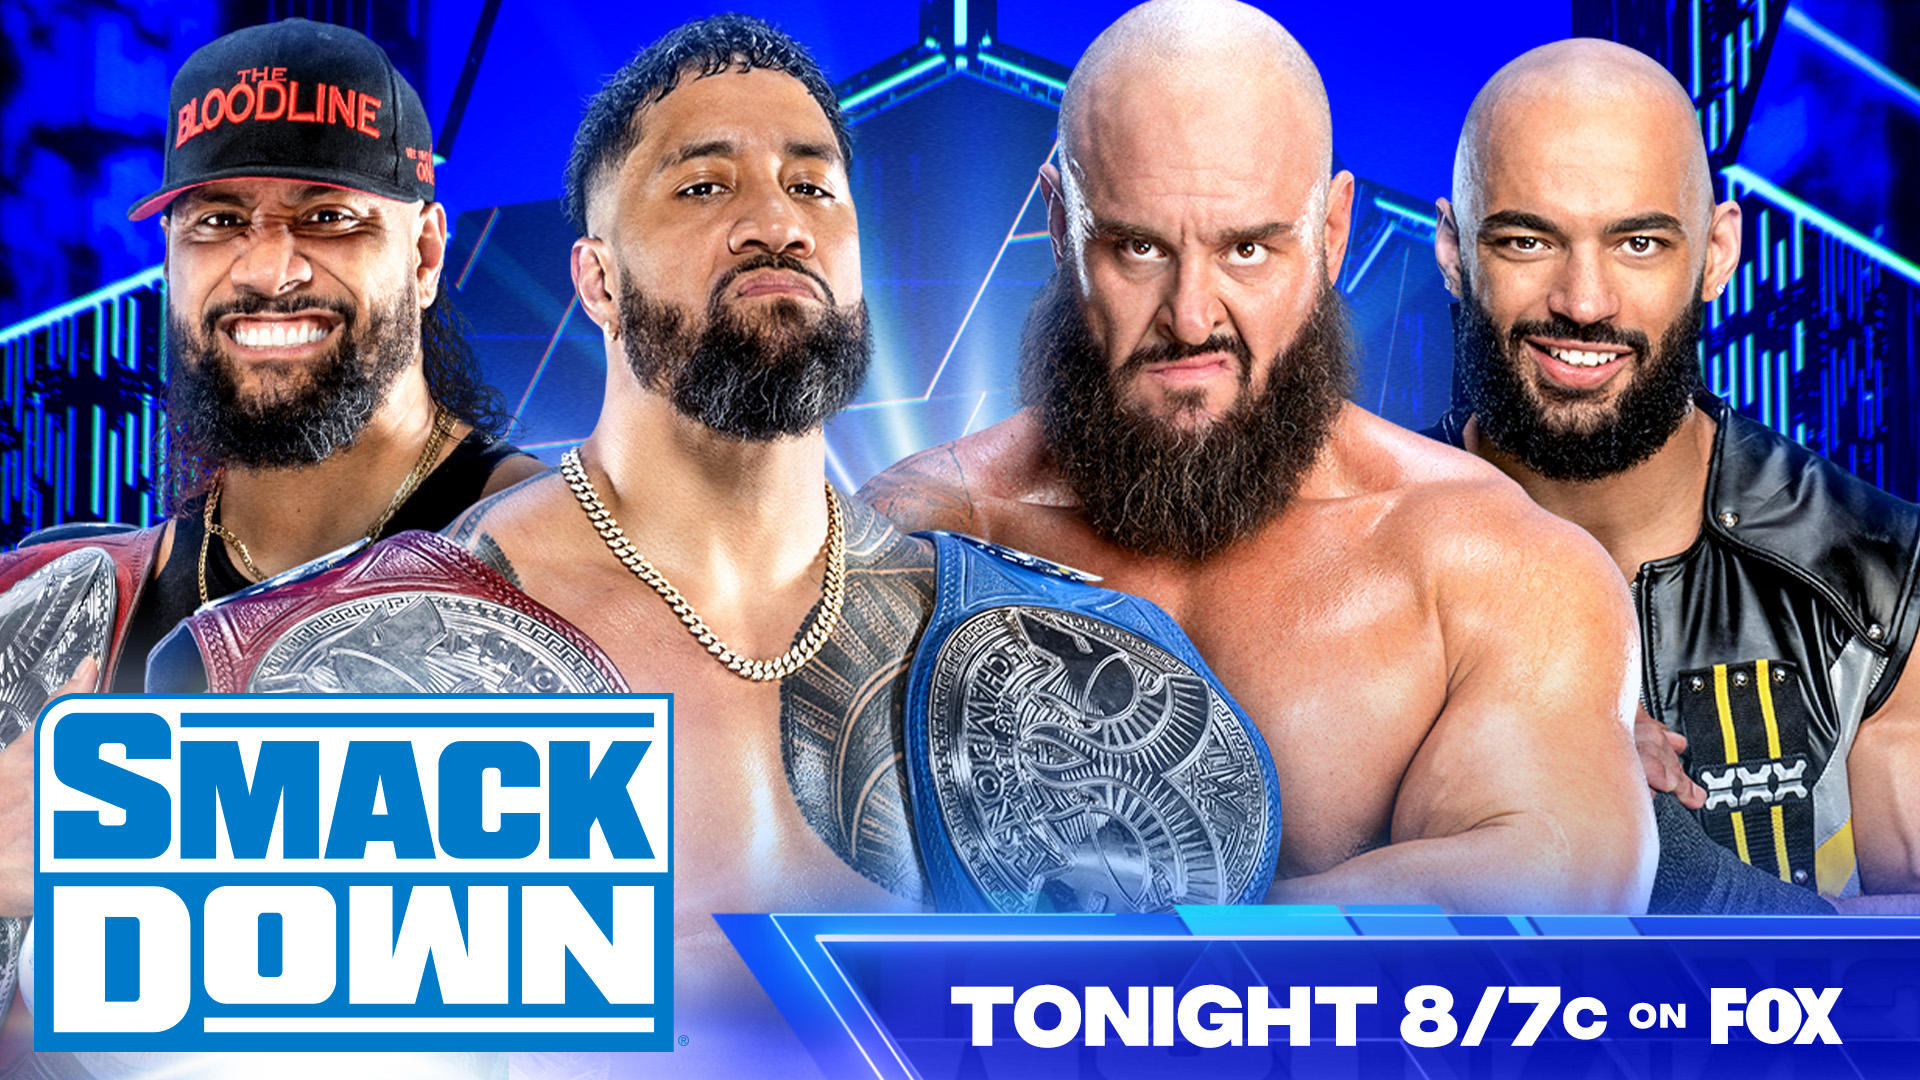 WWE SmackDown preview, full card: February 10, 2023